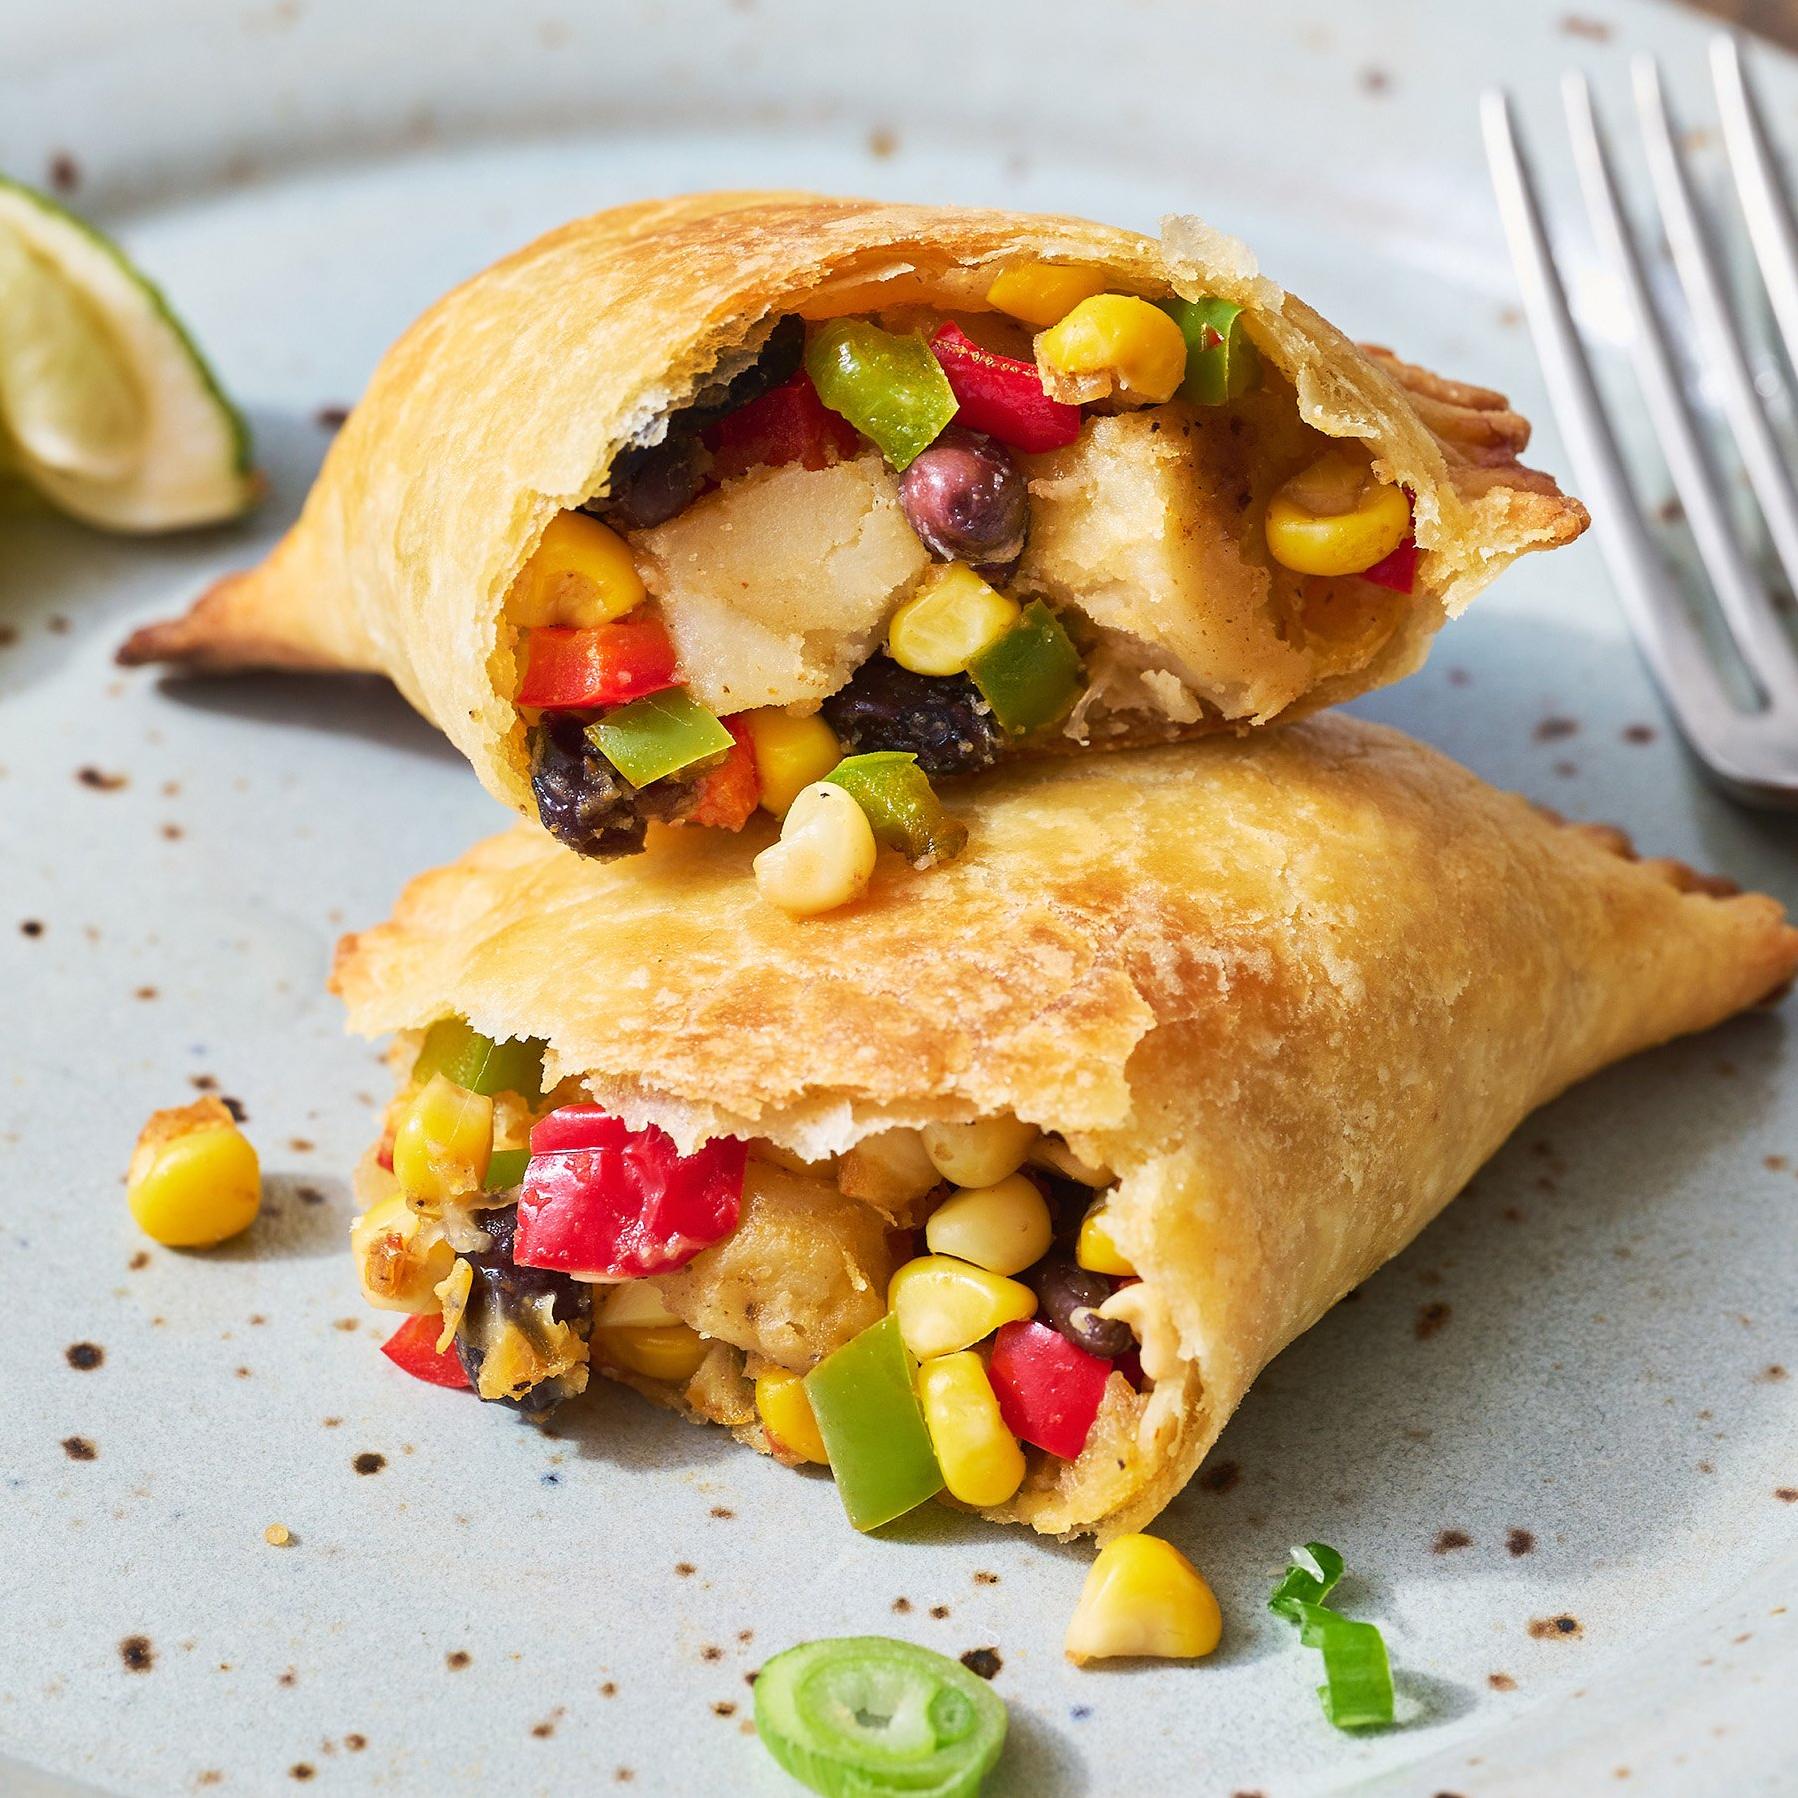  Warm and comforting, these empanadas are the perfect comfort food for any season.